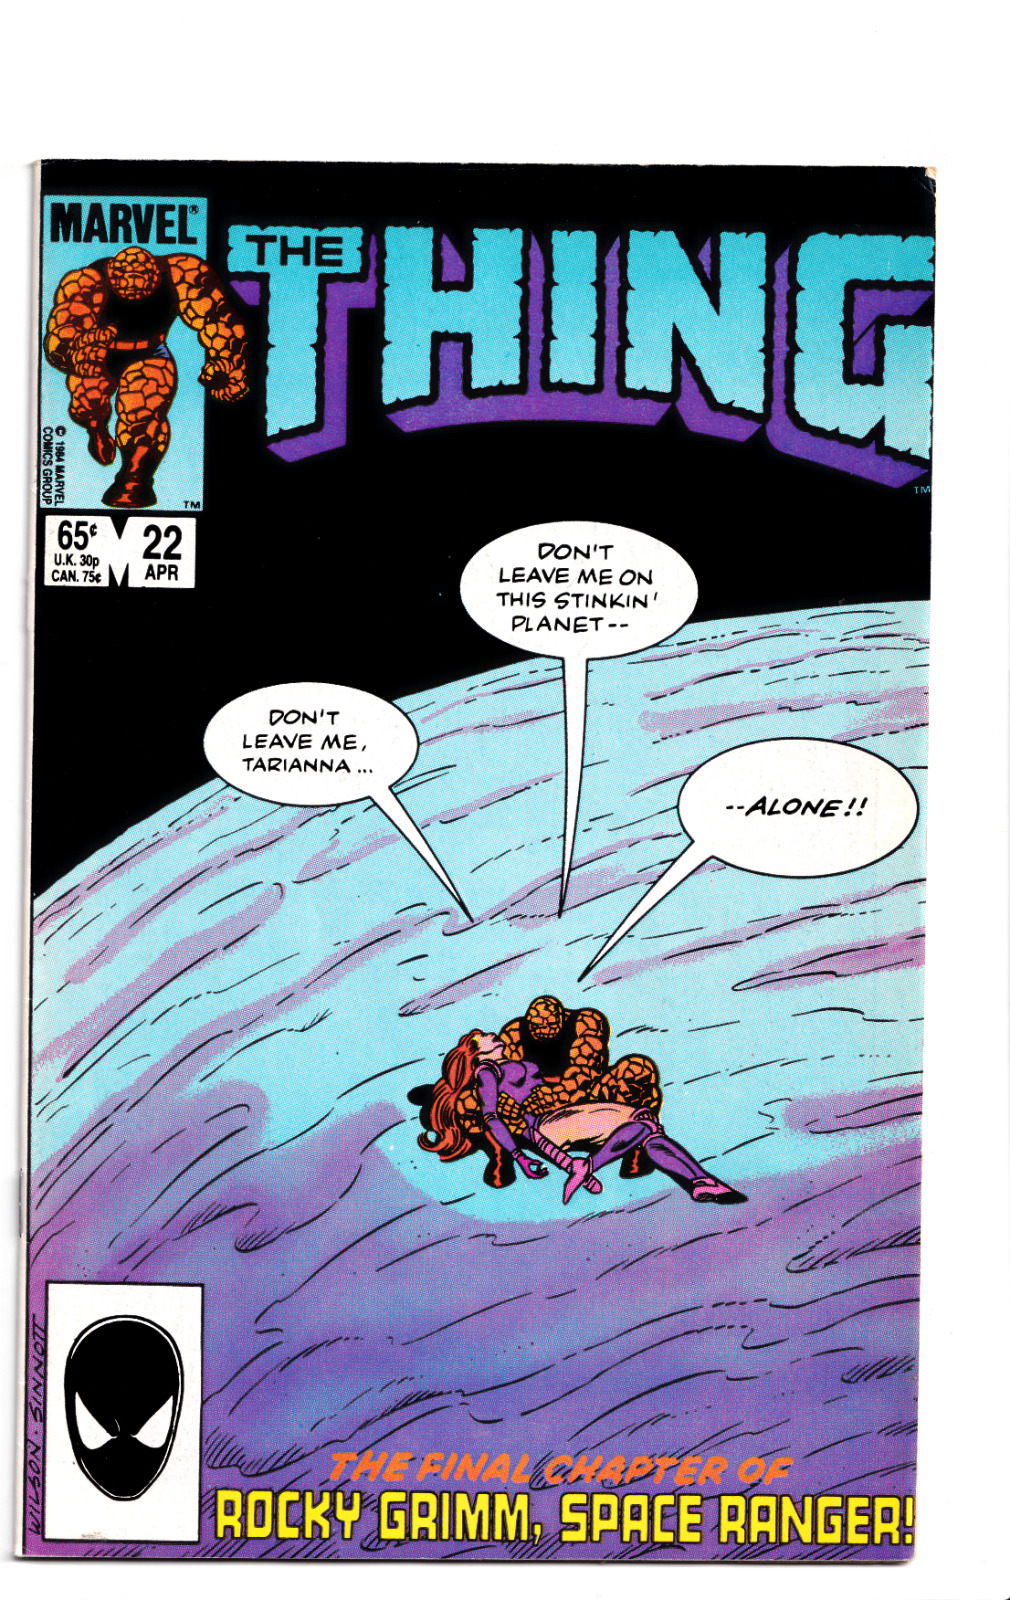 The Thing #22 1985 Marvel Comics